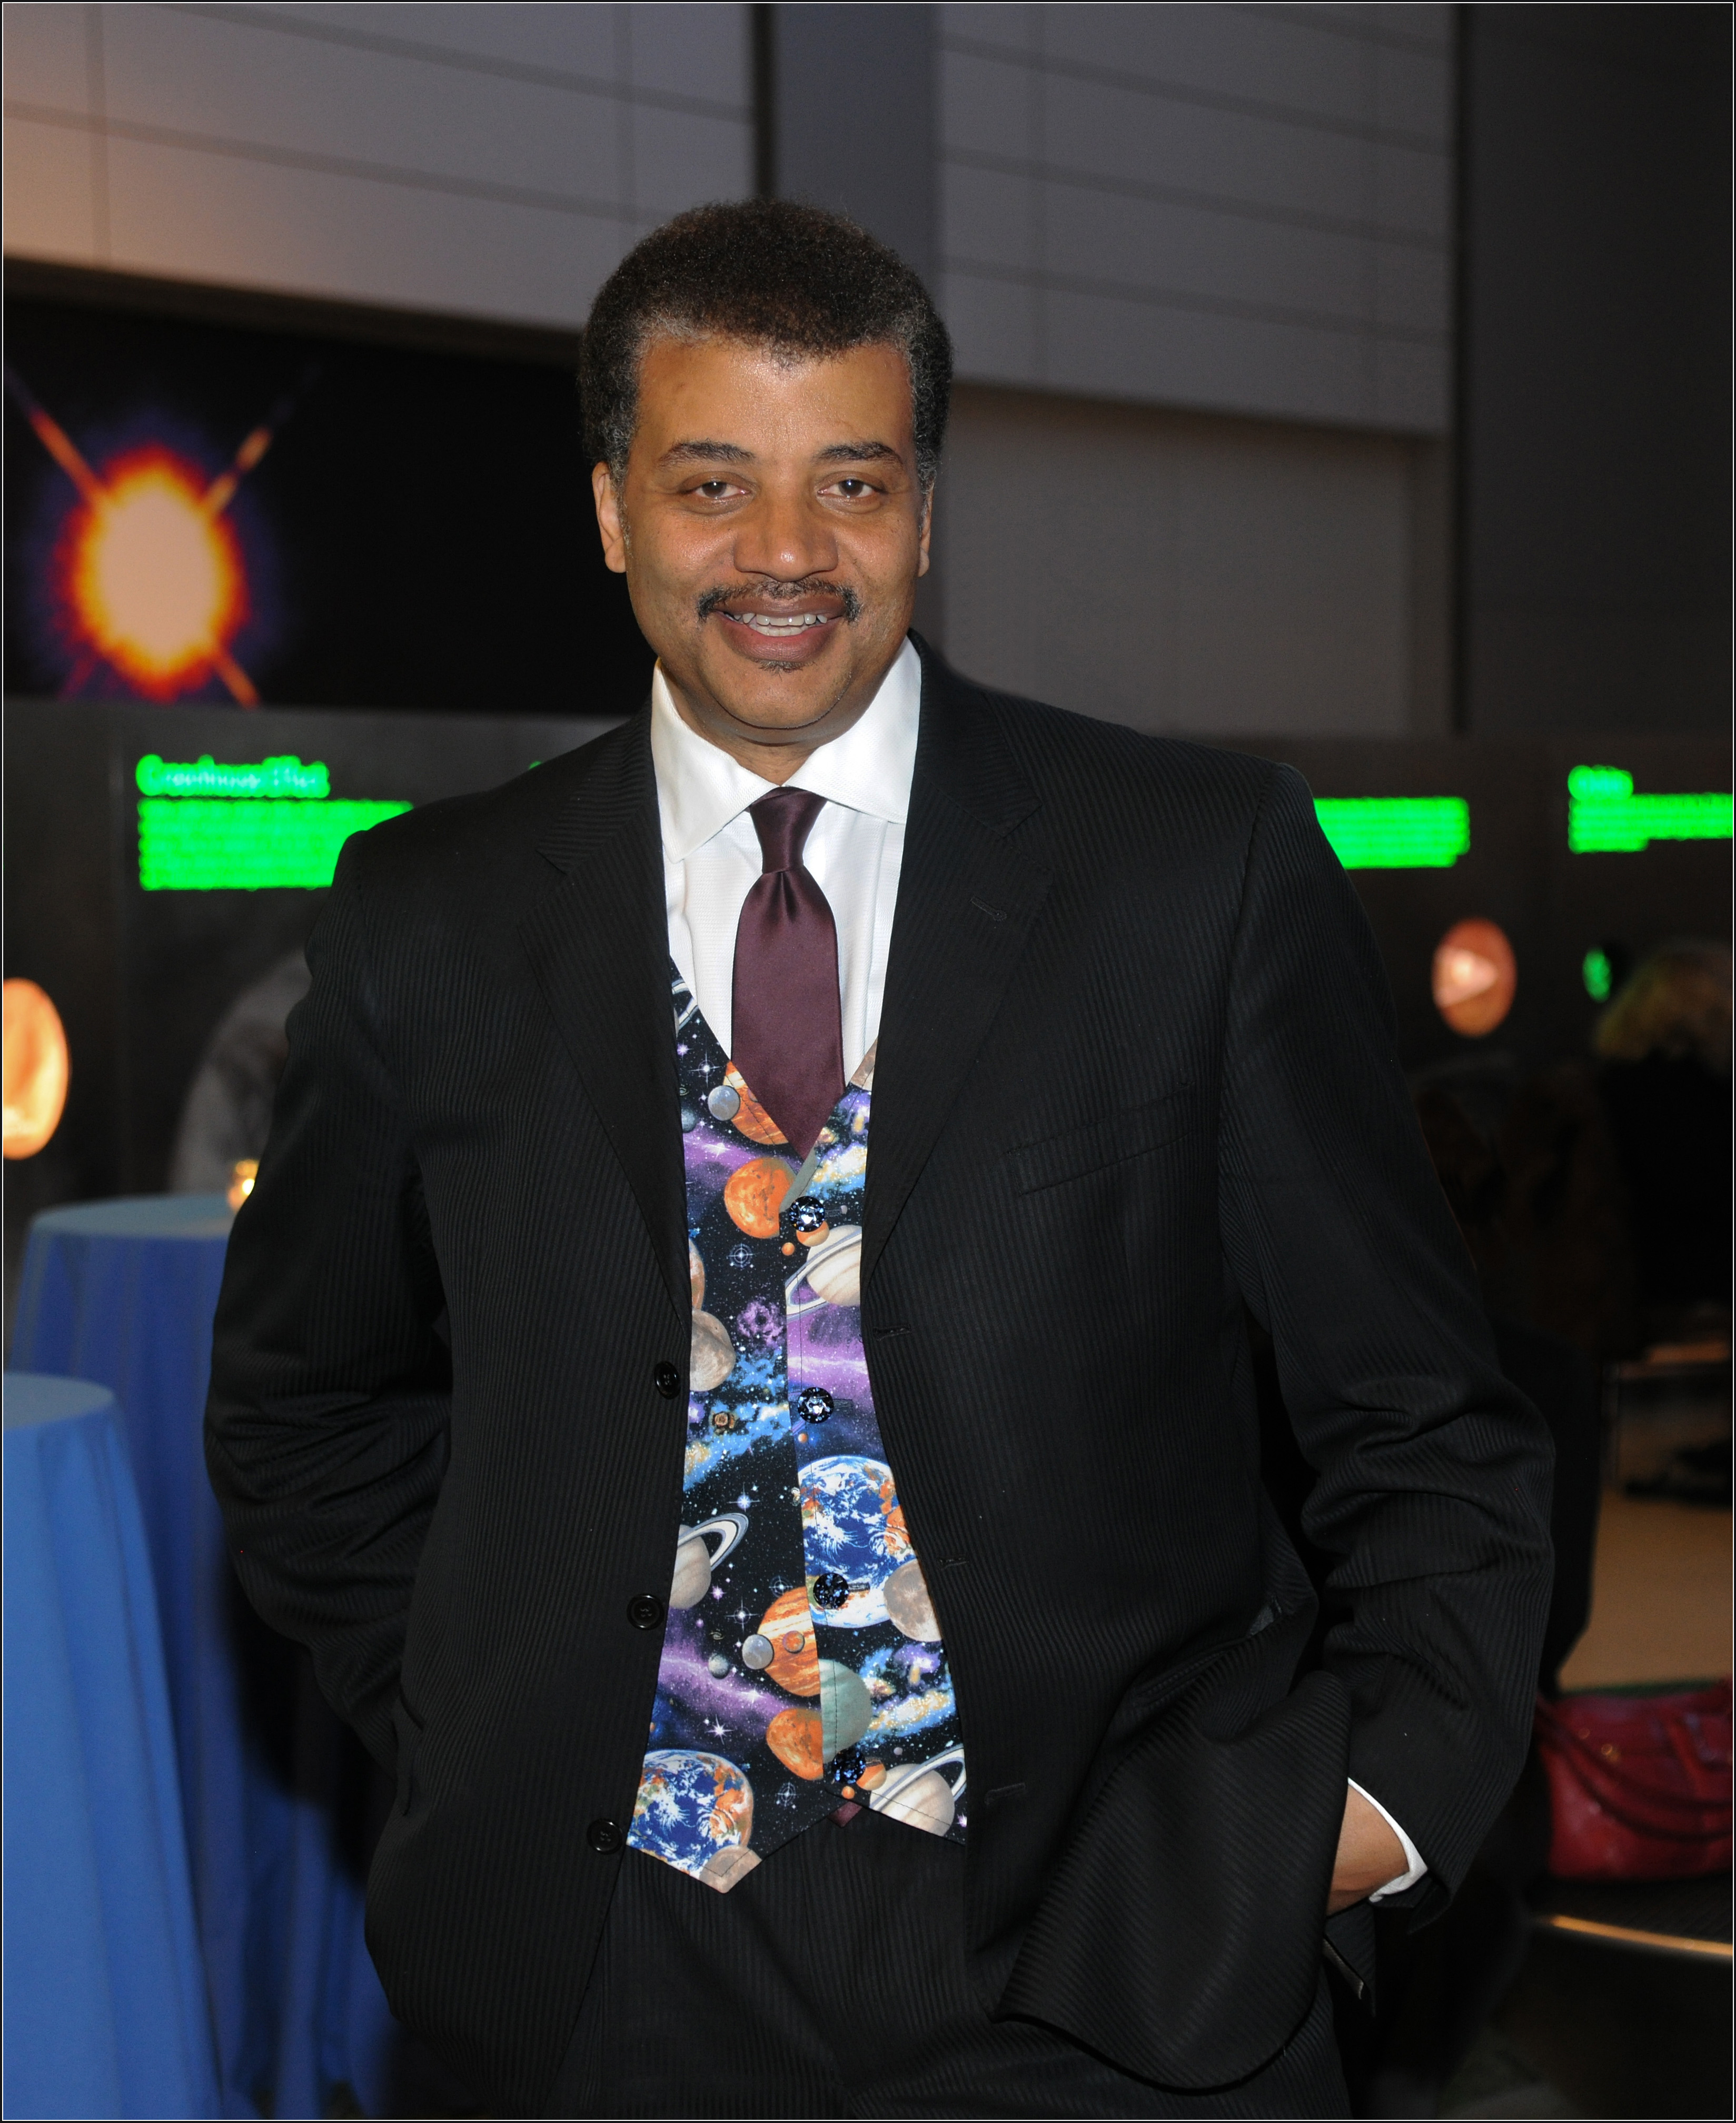 Neil deGrasse Tyson standing in the Hll of the Universe donning his planet vest.